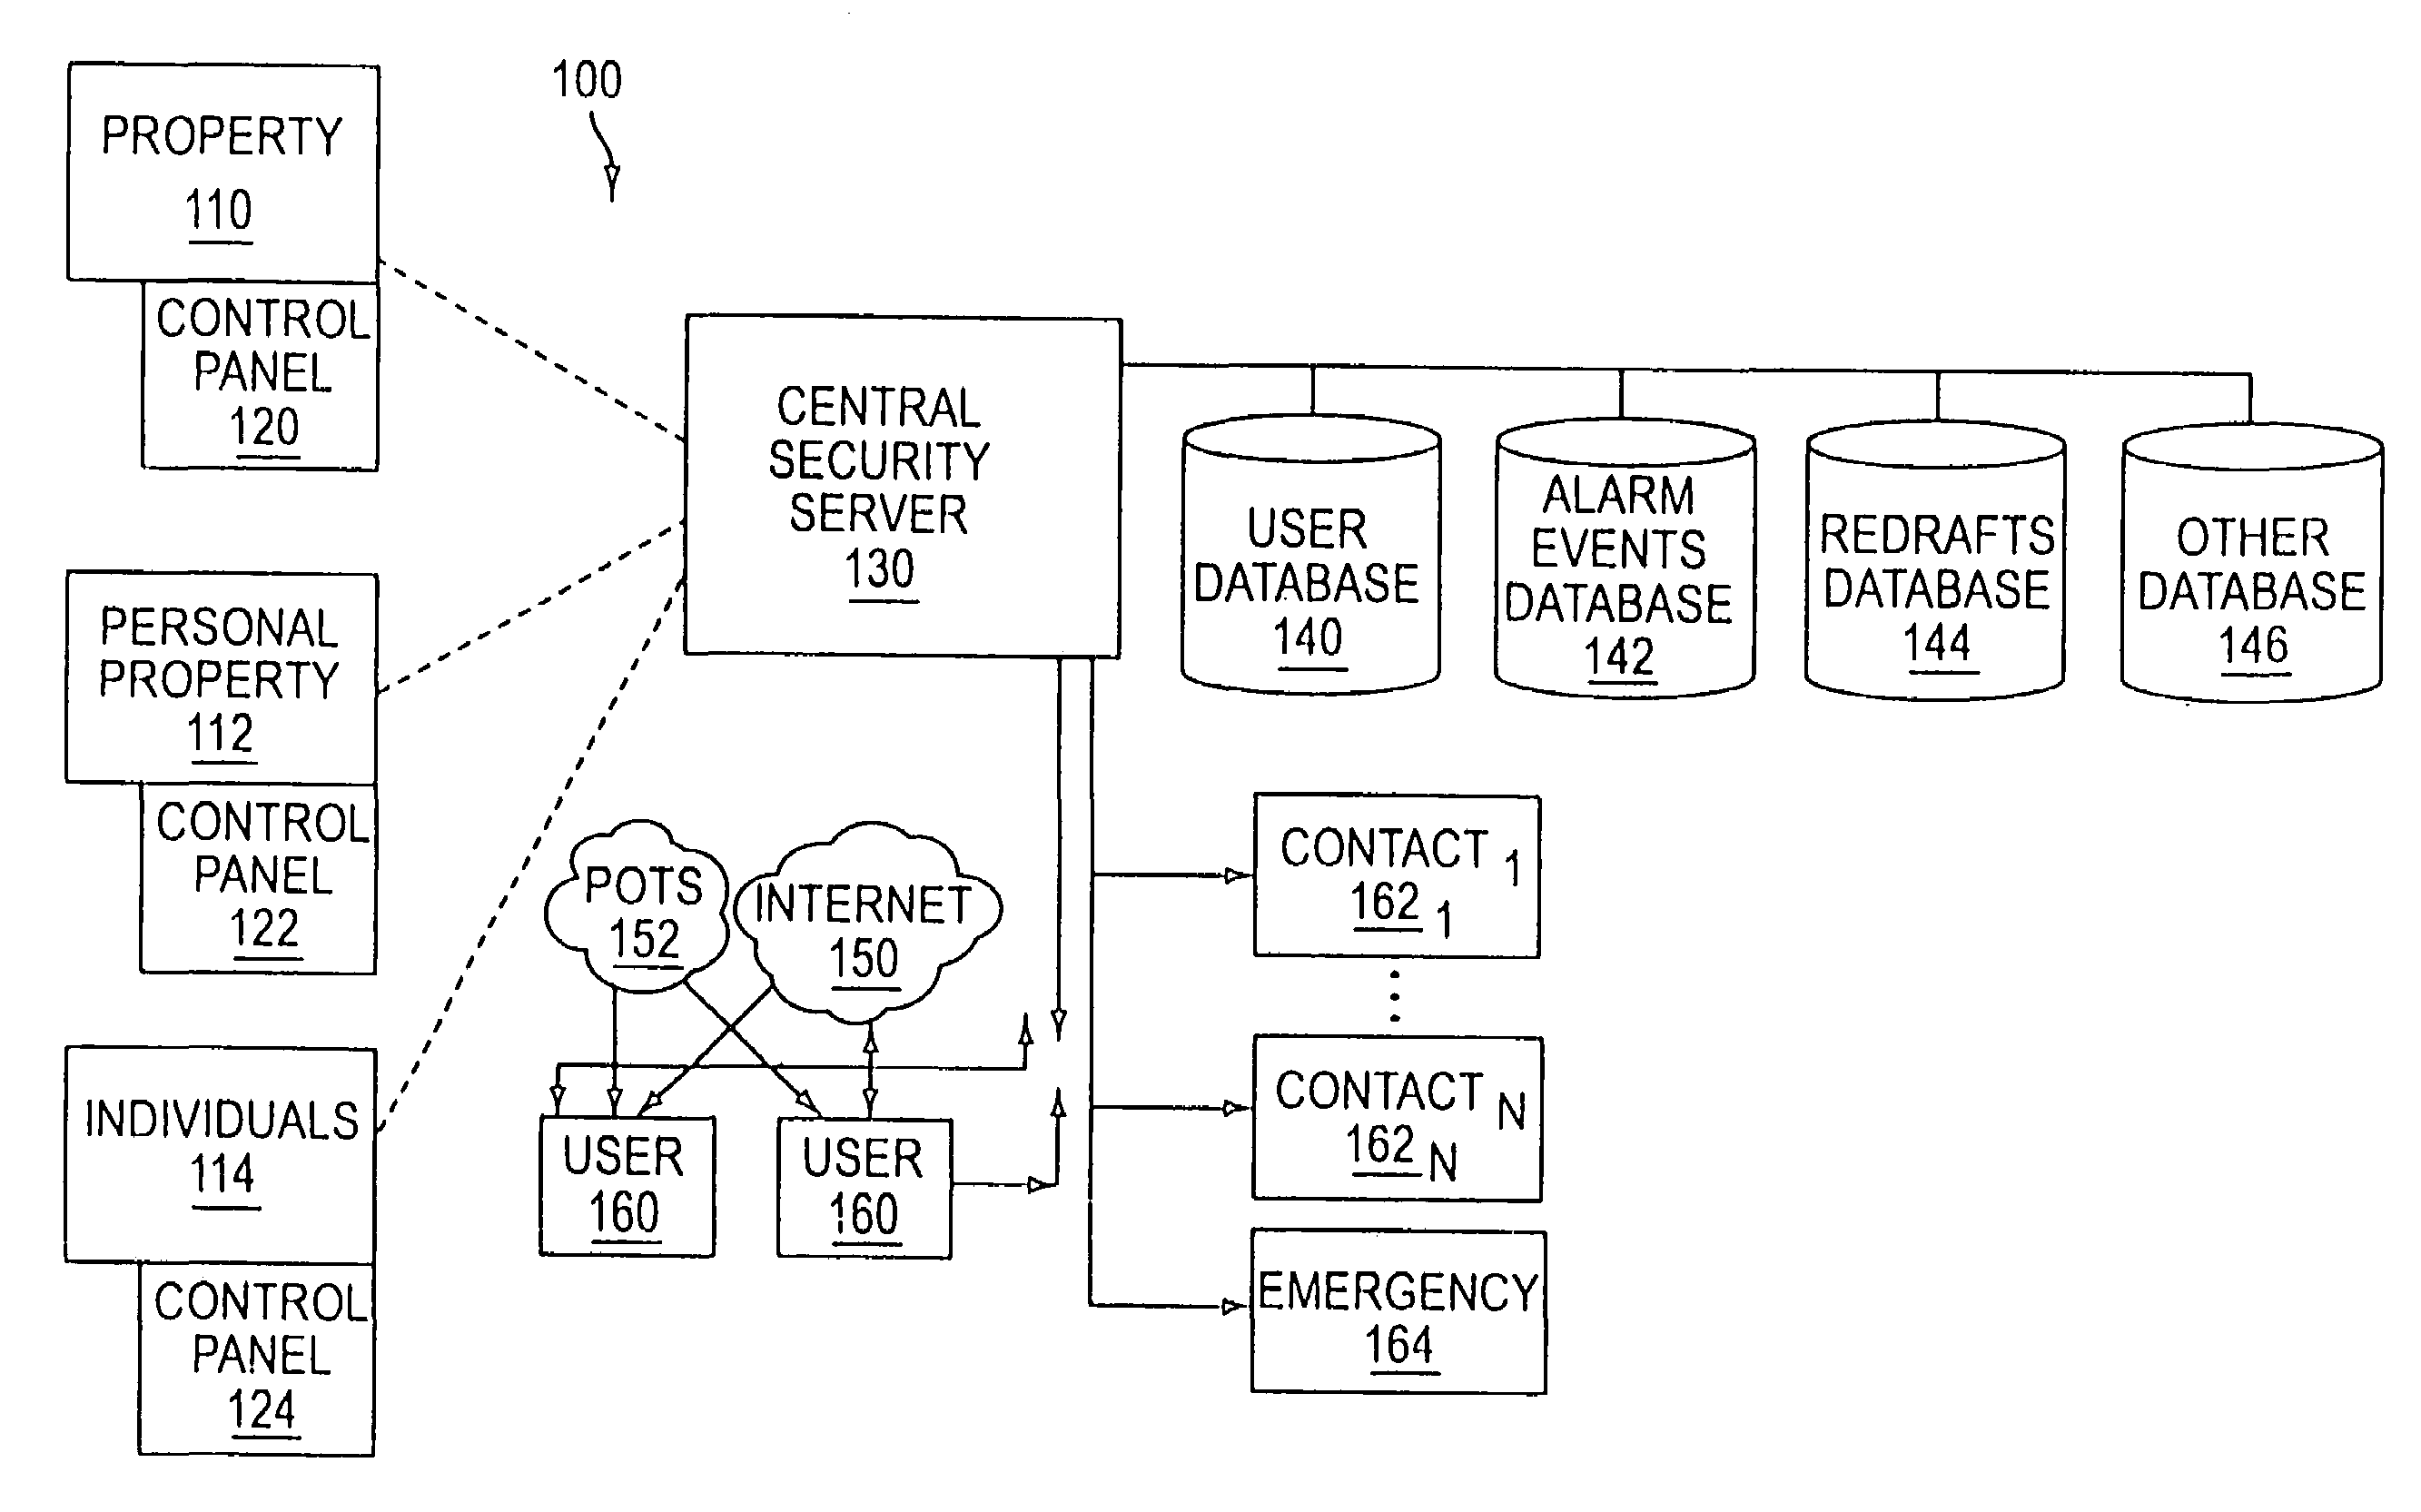 System and method for connecting security systems to a wireless device